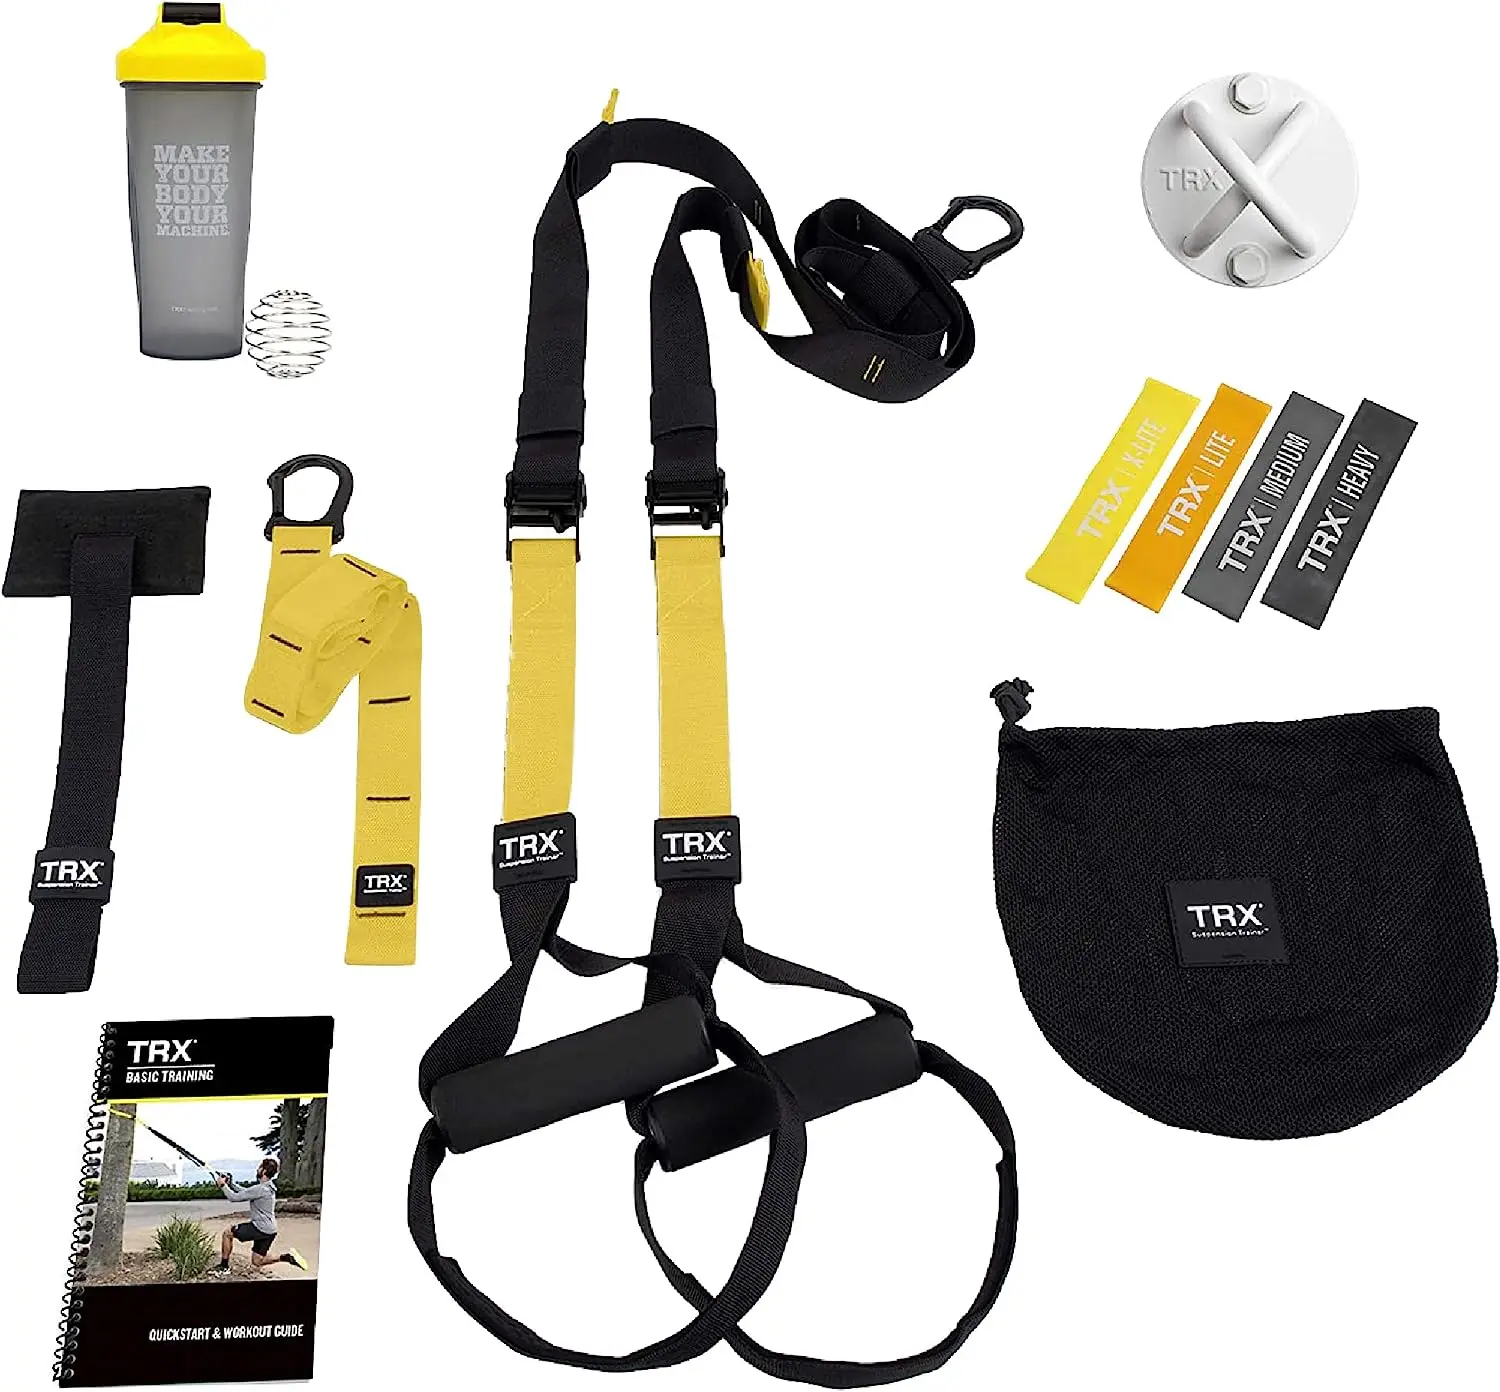 

All-in-One Suspension Trainer Bundle - Seasoned Gym Enthusiast, Includes Training Club Access, XMount Anchor, 4 Exercise Bands